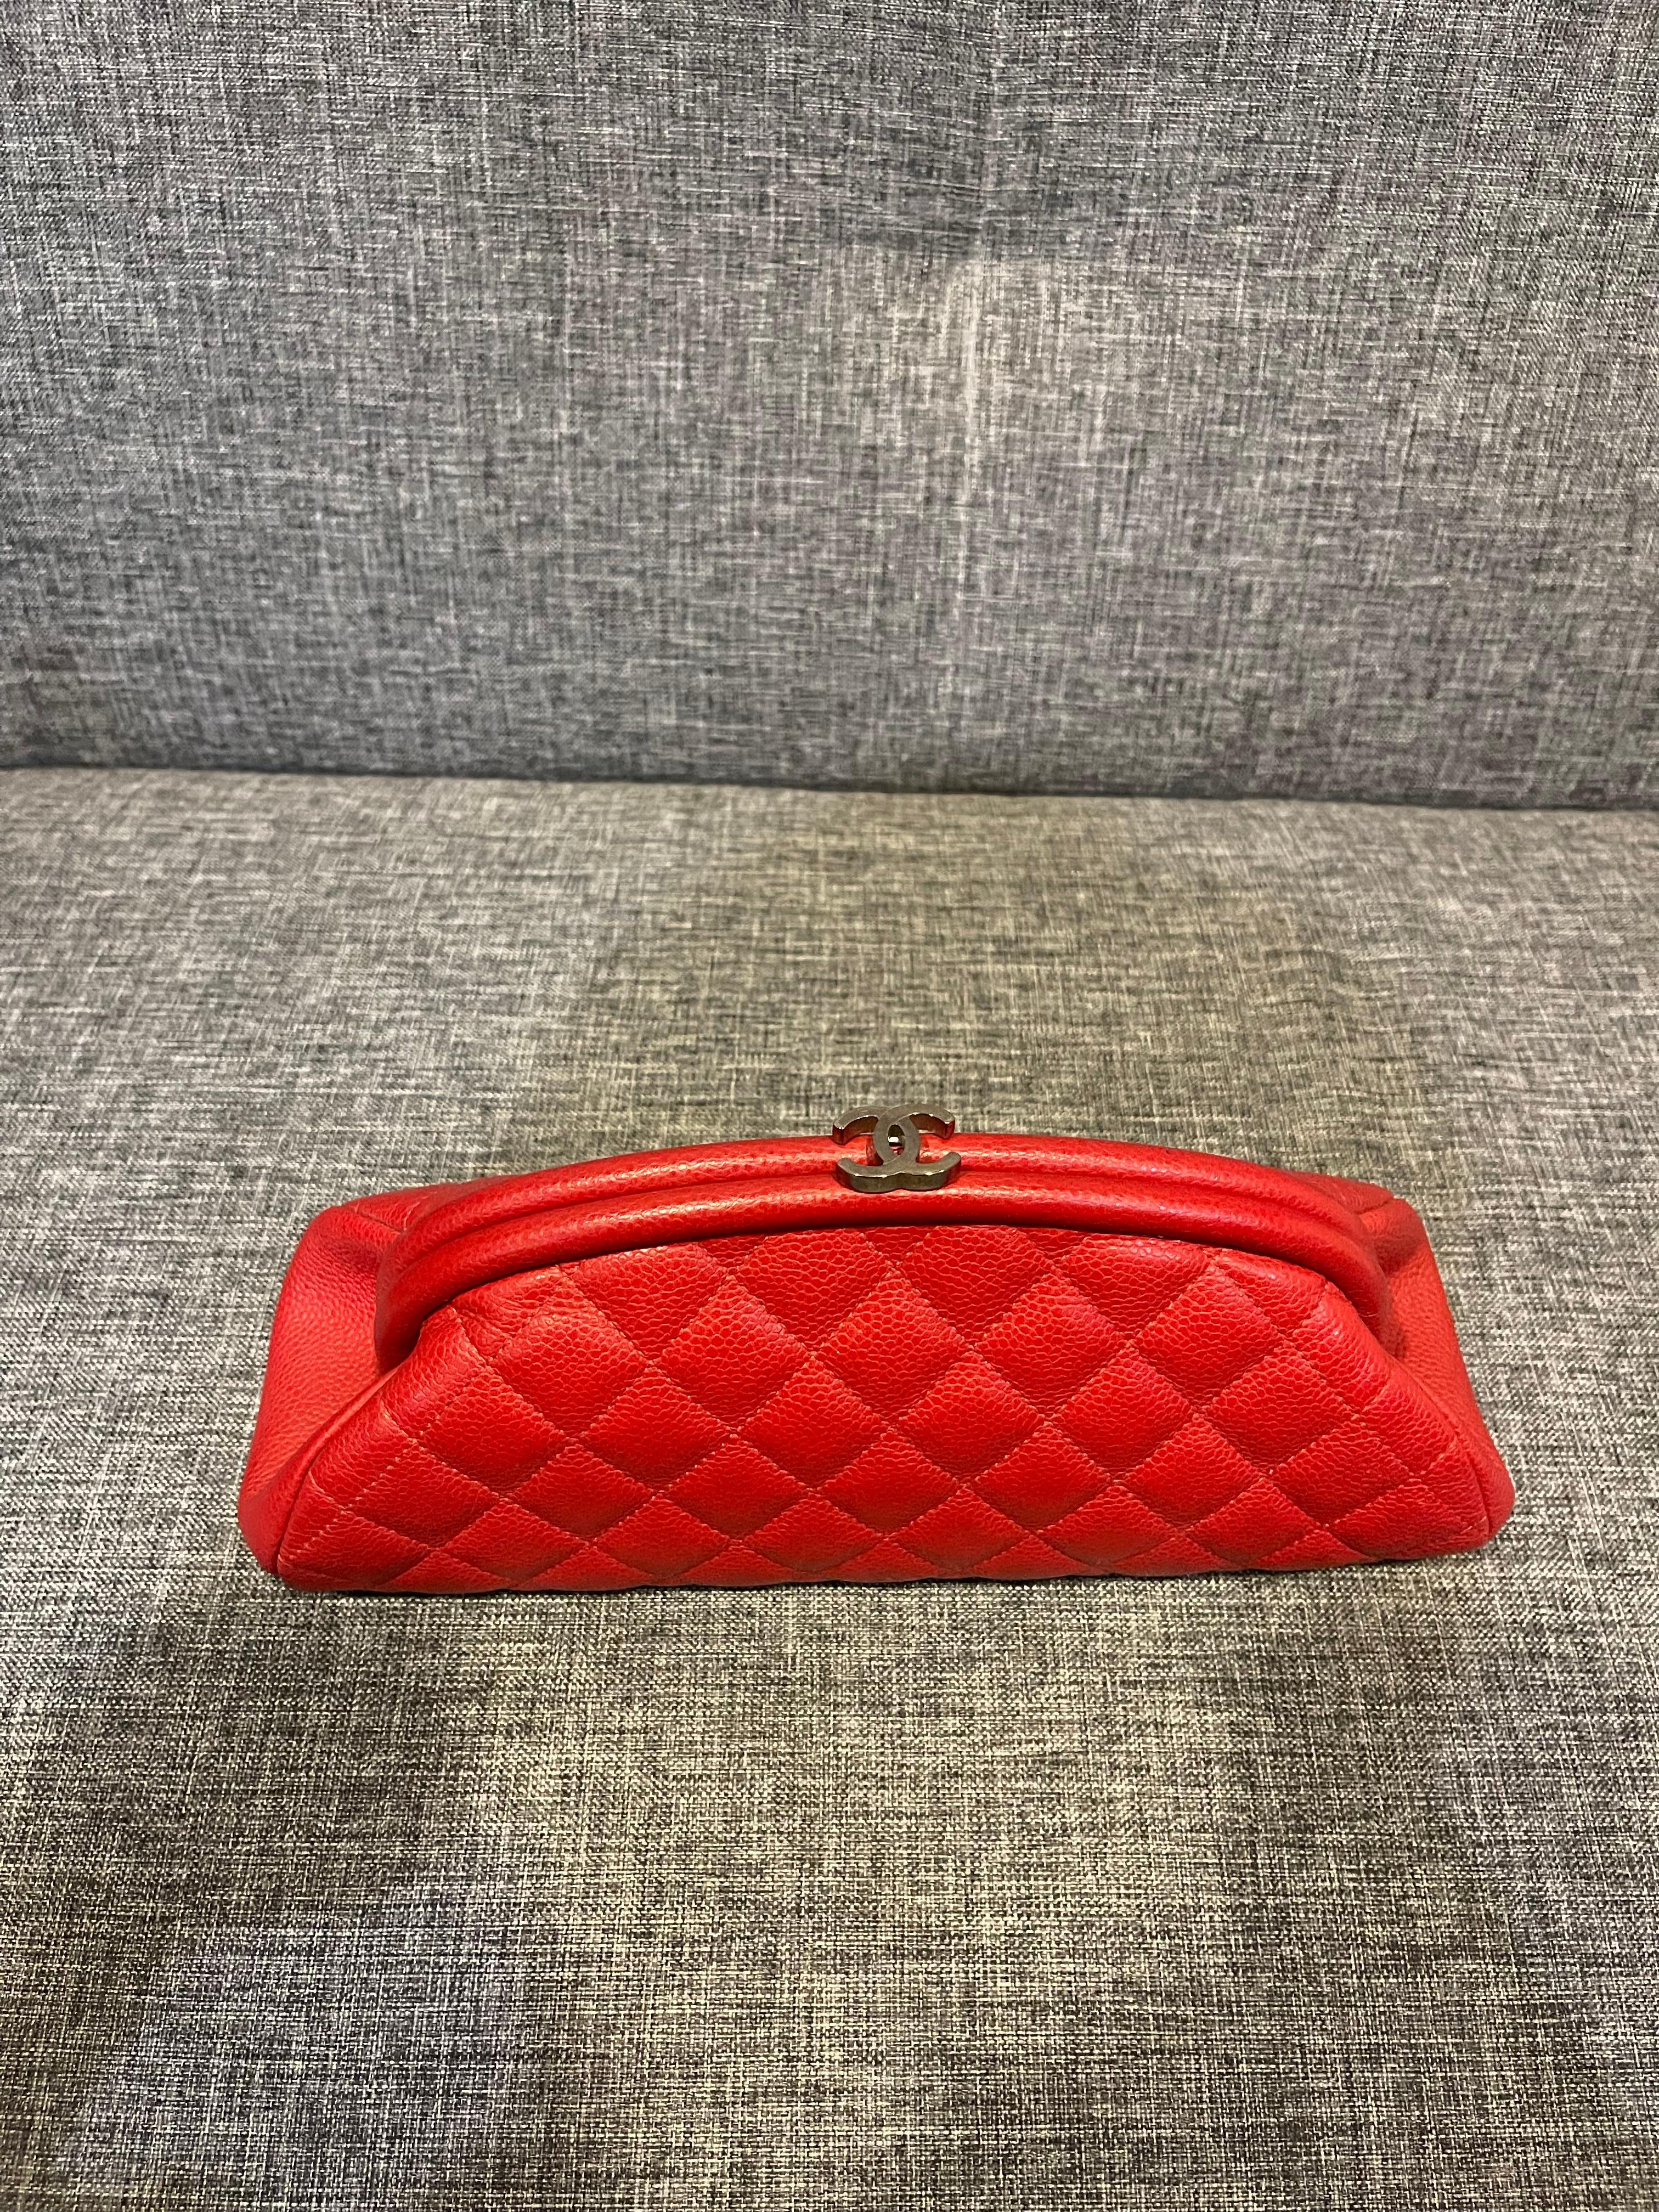 Women's Chanel Red Caviar Leather Quilted Timeless Clutch For Sale